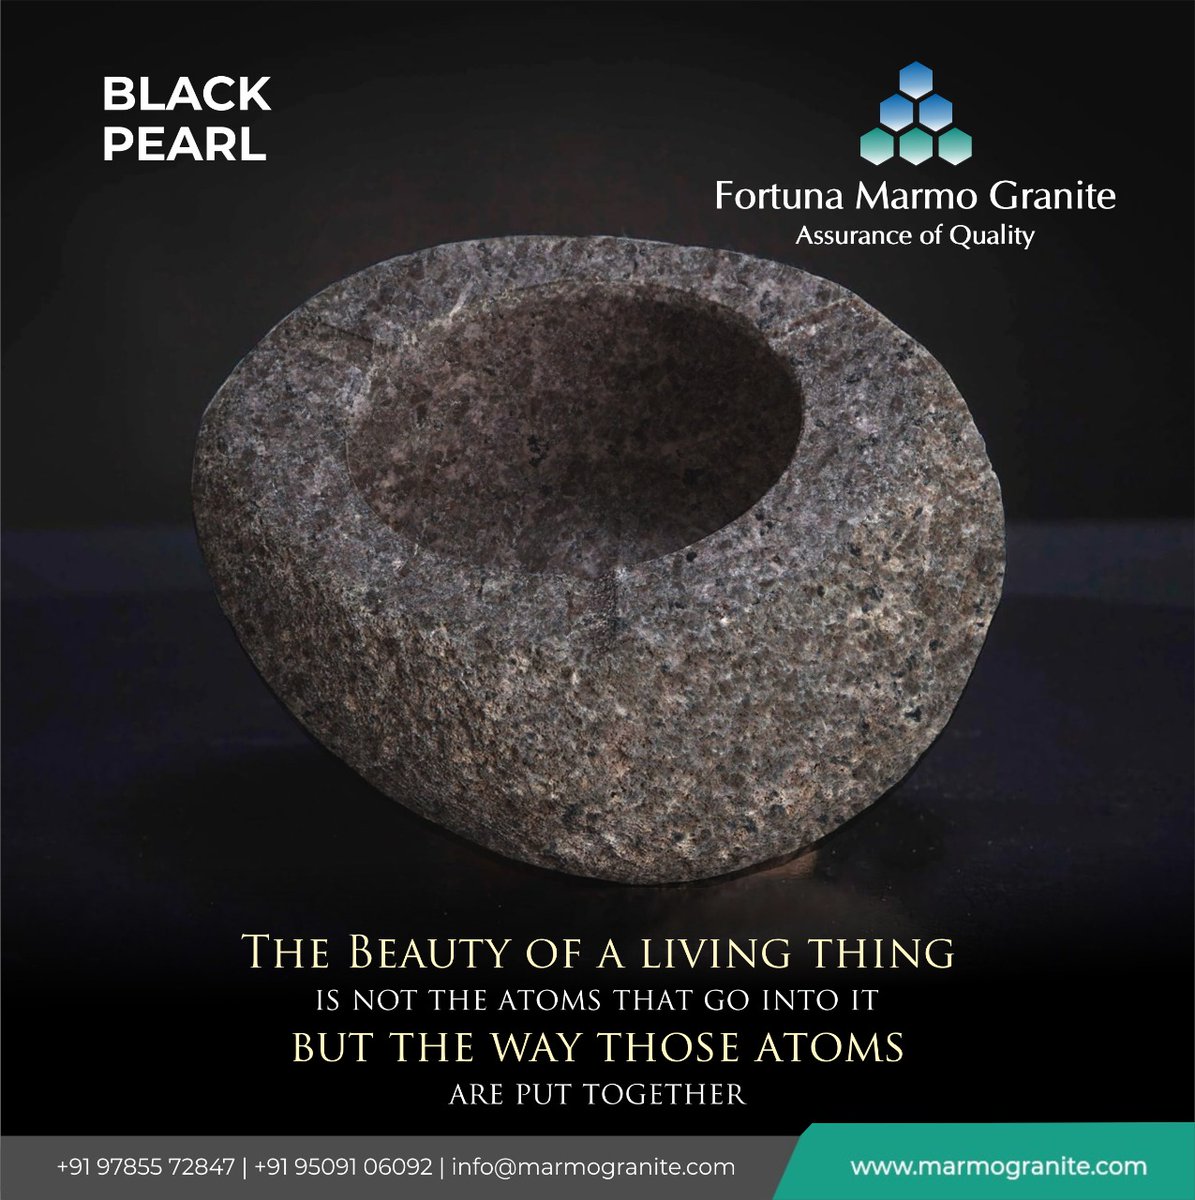 The Beauty of a living thing is not the atoms that go into it, but the way those atoms are put together.

#blackpearl #indianmarbles #blackgranite #stargalaxygranite #simplicity #luxury #Tabletops #indiangranite #granitetiles #graniteCountertops #kitchentops #icelands